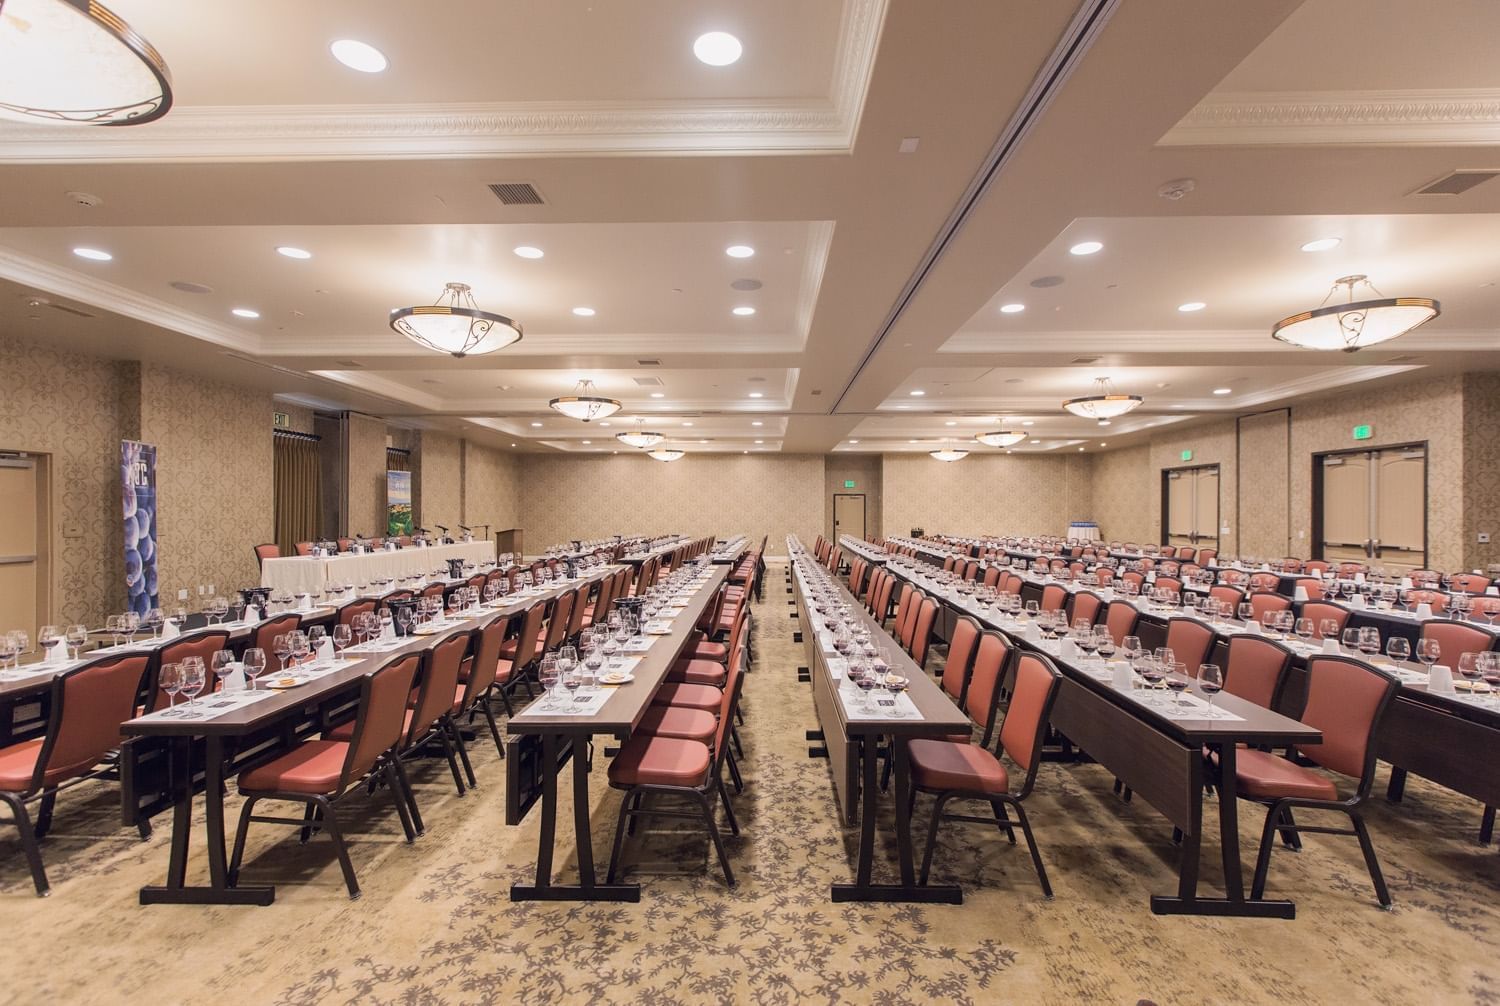 Conference rooms at Allegretto Vineyard Resort set up classroom 